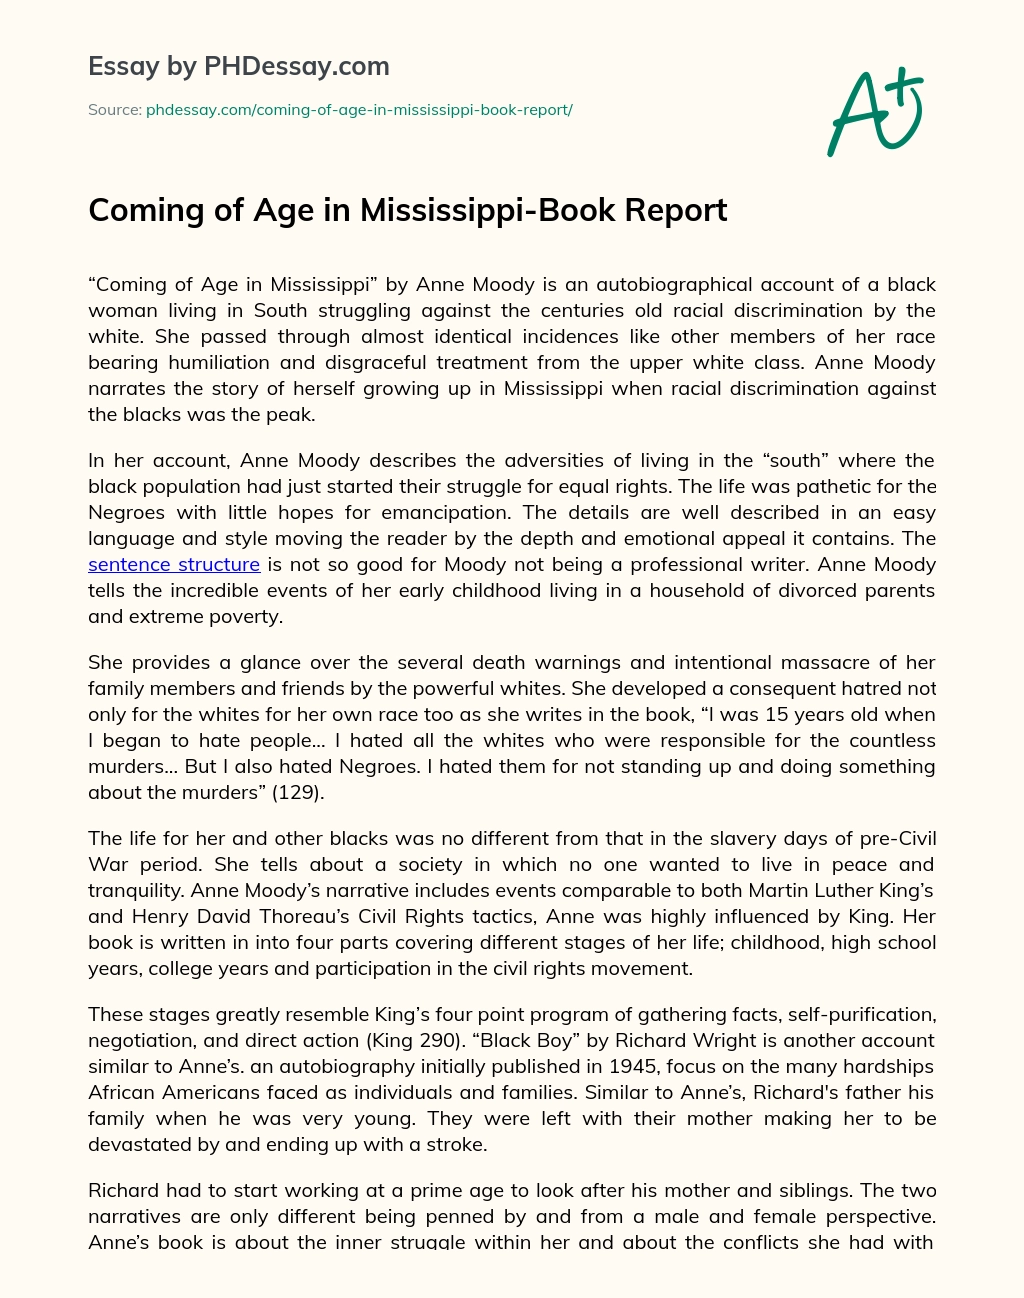 Coming of Age in Mississippi-Book Report essay